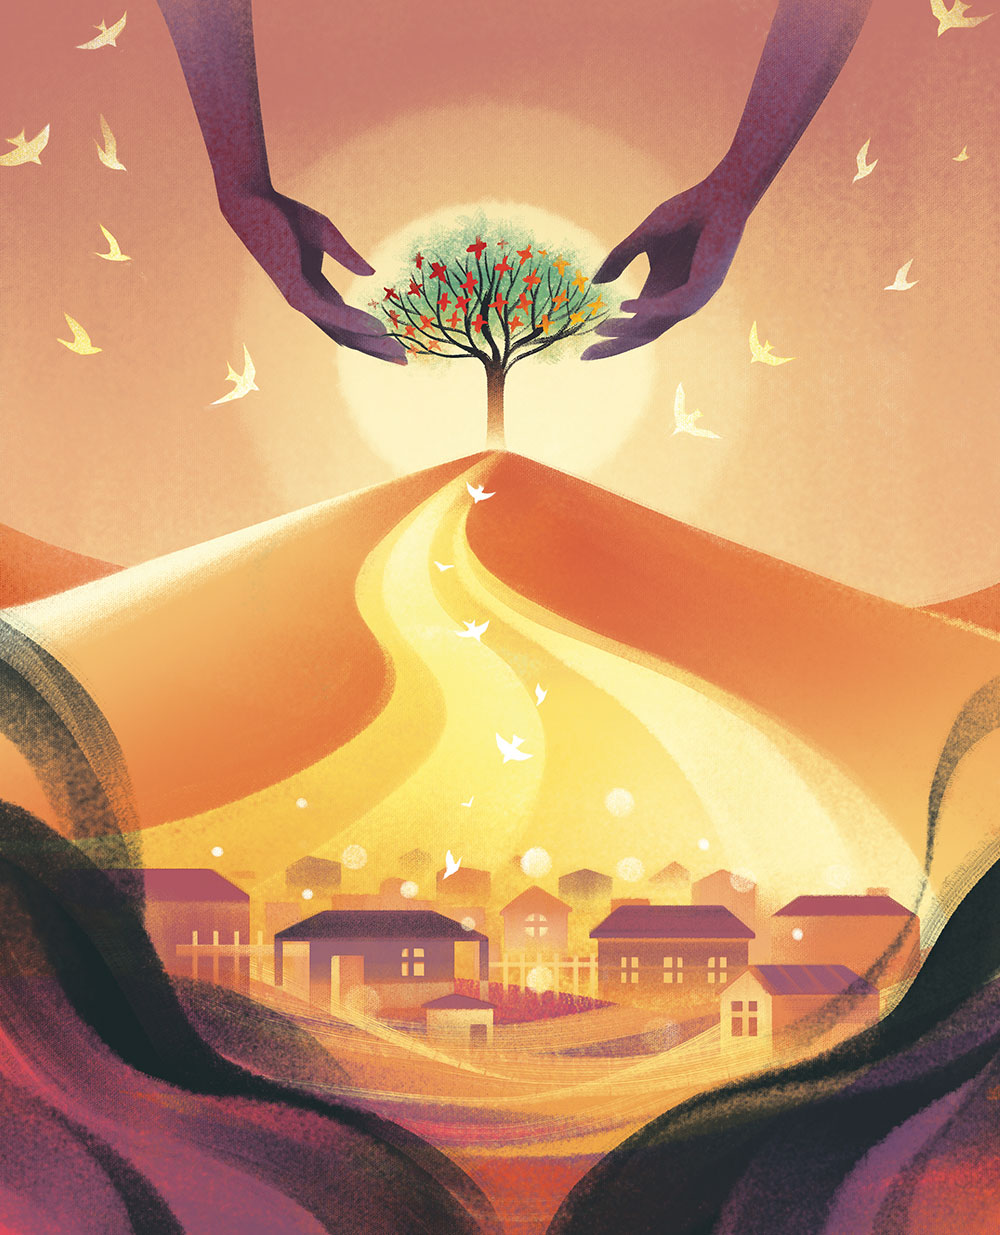 Illustration of two hands holding a tree on a hill above a small village. 